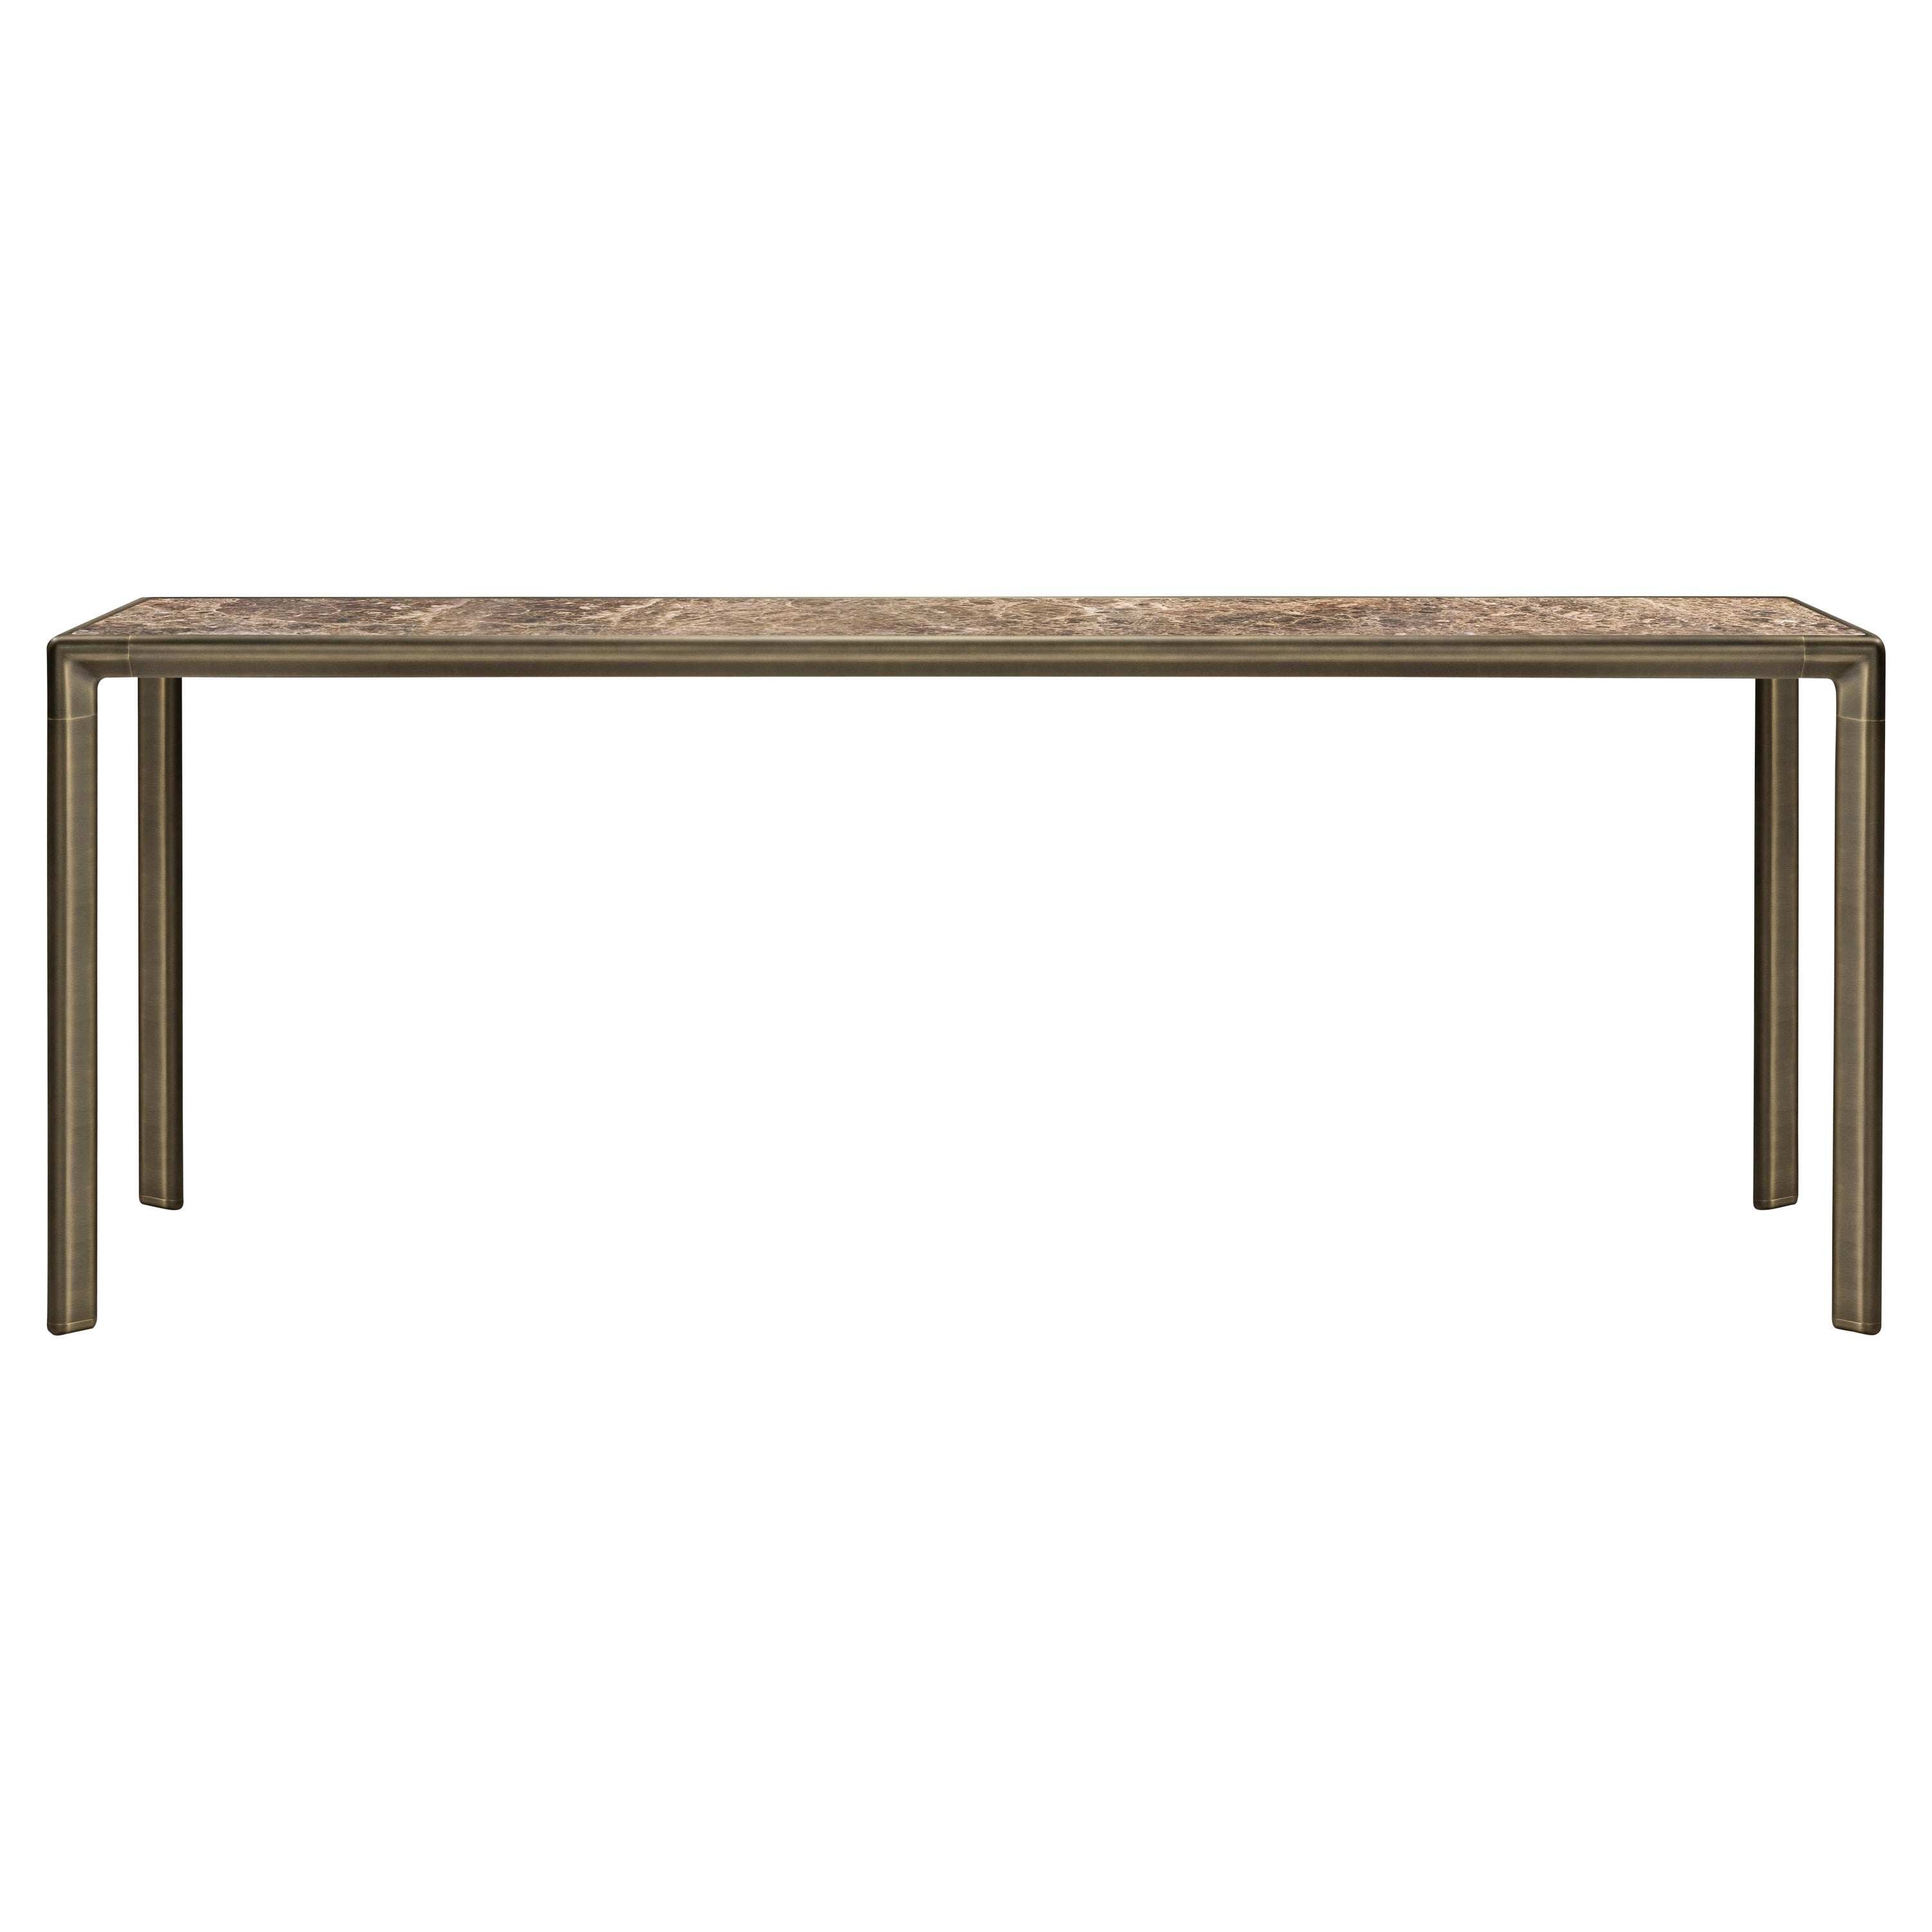 Frame Console, Emperador Dark top and Burnished Brass Metal Parts, Made in Italy